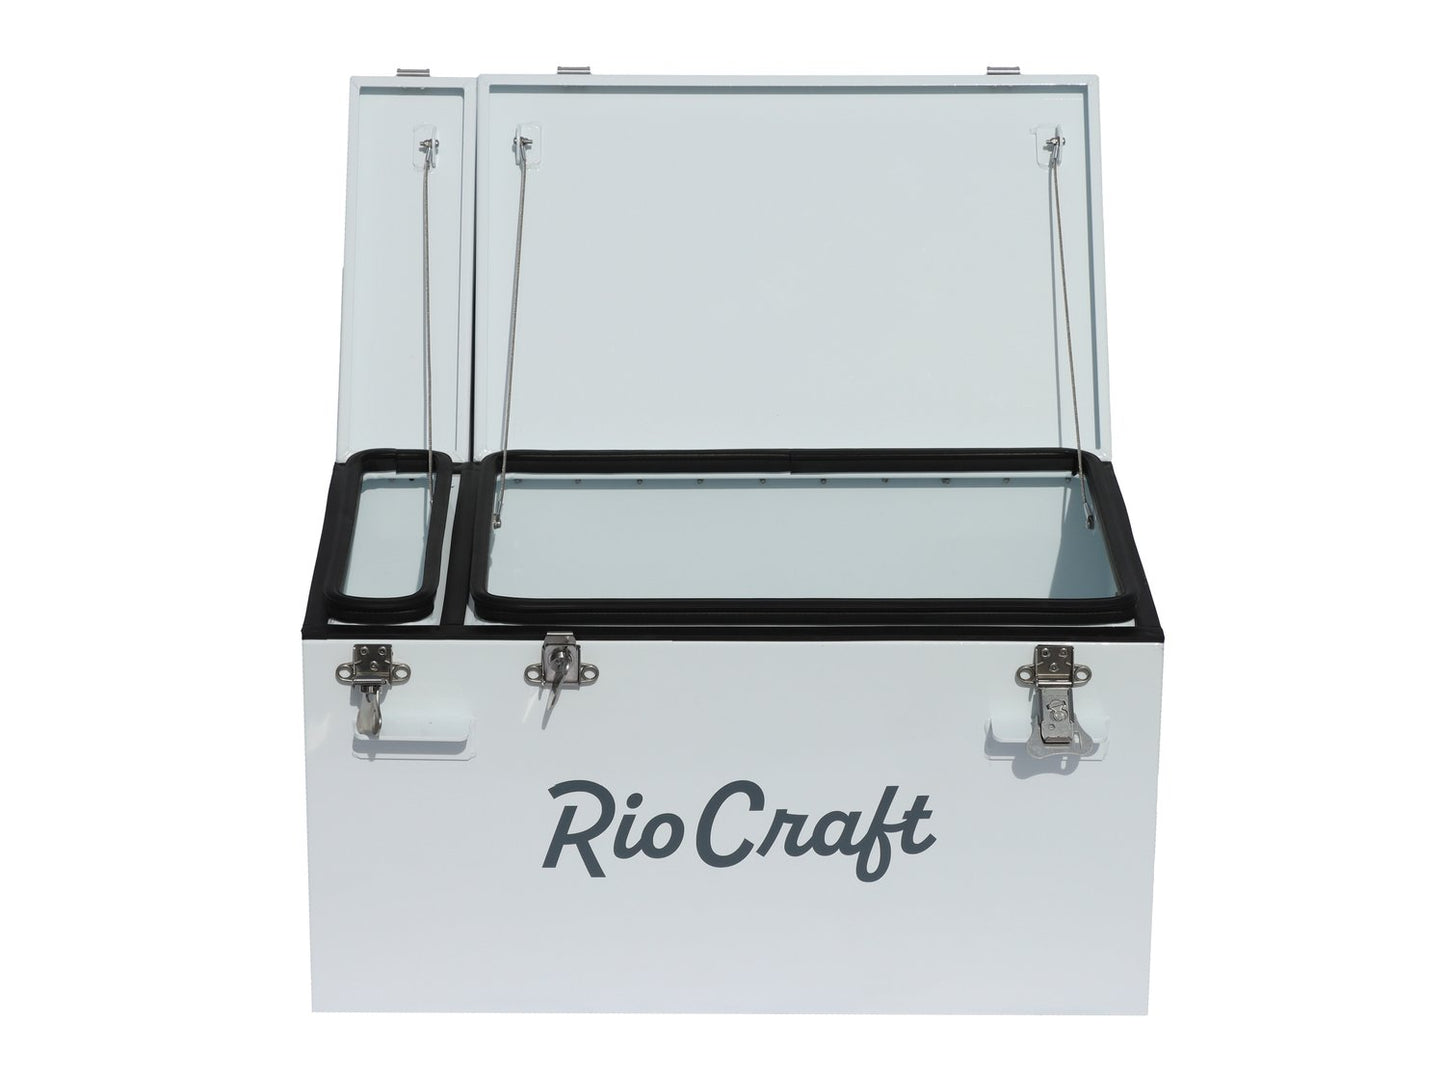 A white Powder-Coated Aluminum Drybox with the protective buffer "Rio Craft" on it.